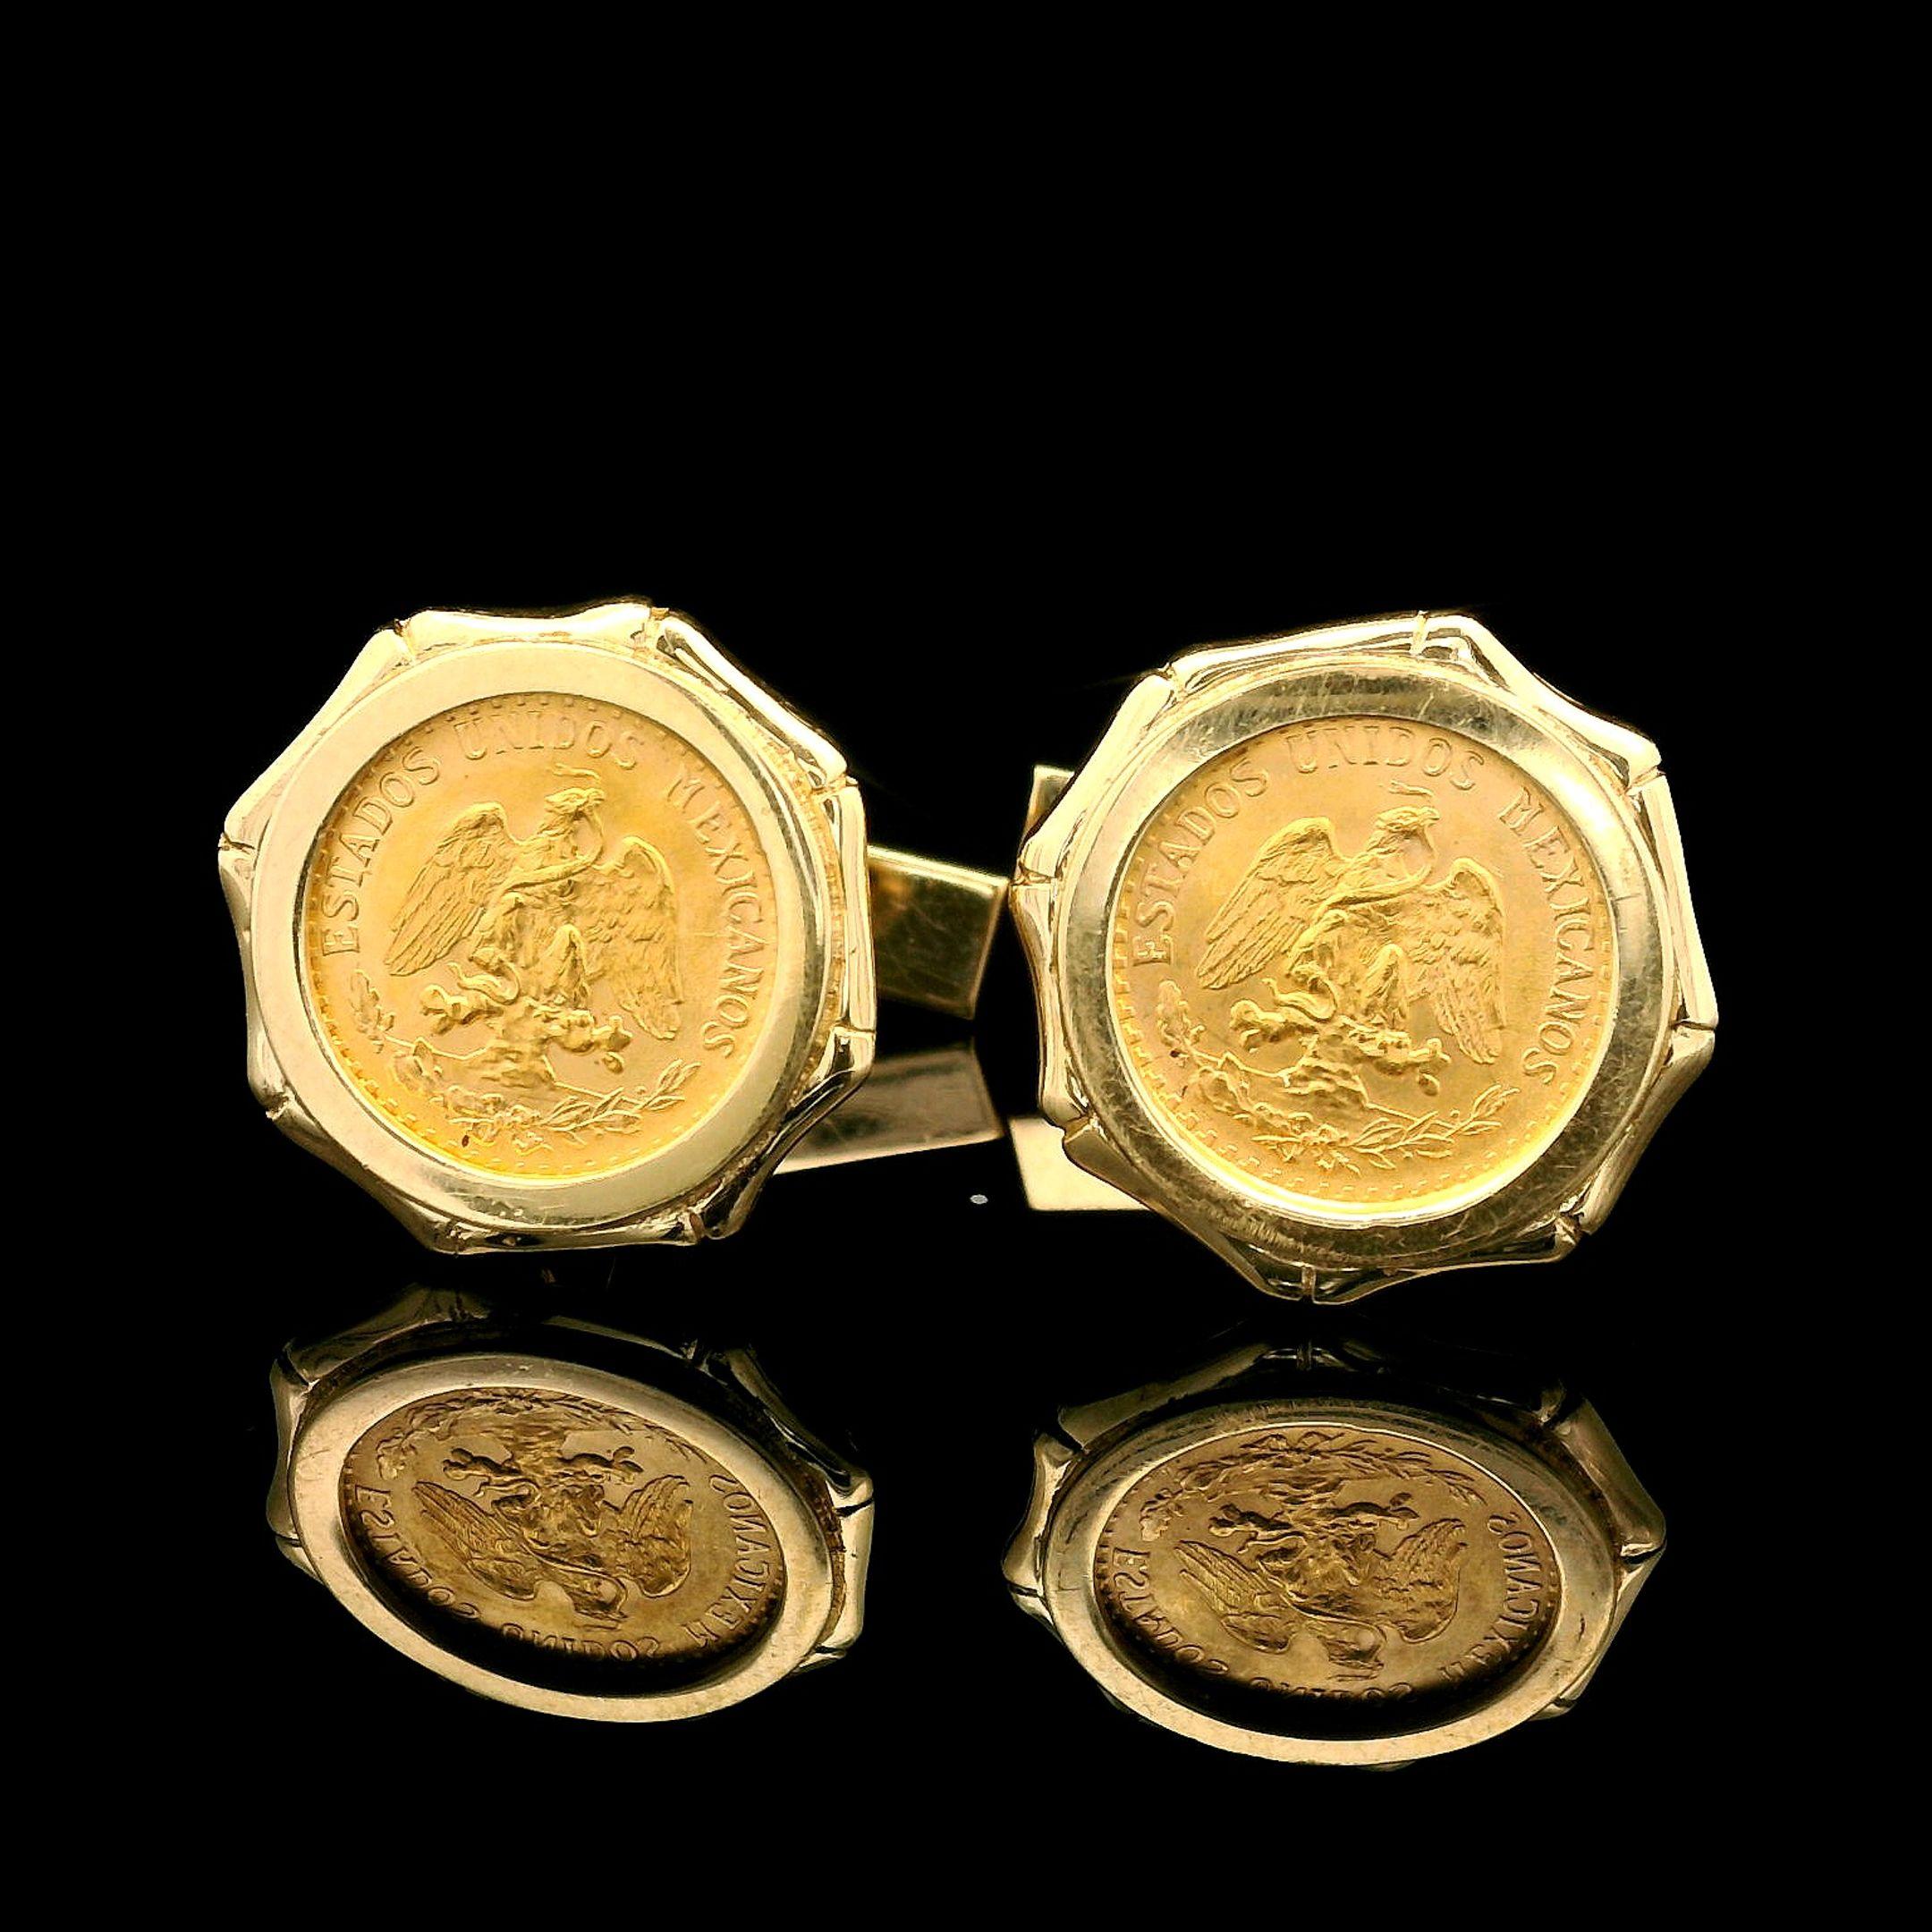 Material: 20k Yellow Gold Coins - 14k Yellow Gold Frames & Backings
Weight: 11.6 Grams
Panel Dimensions: 16.8x16.6mm (approx.)
Backing: Swivel back
Clearance: 14.3mm (approx.)
Condition: Vintage, shows some wear. Excellent physical condition.
Stock